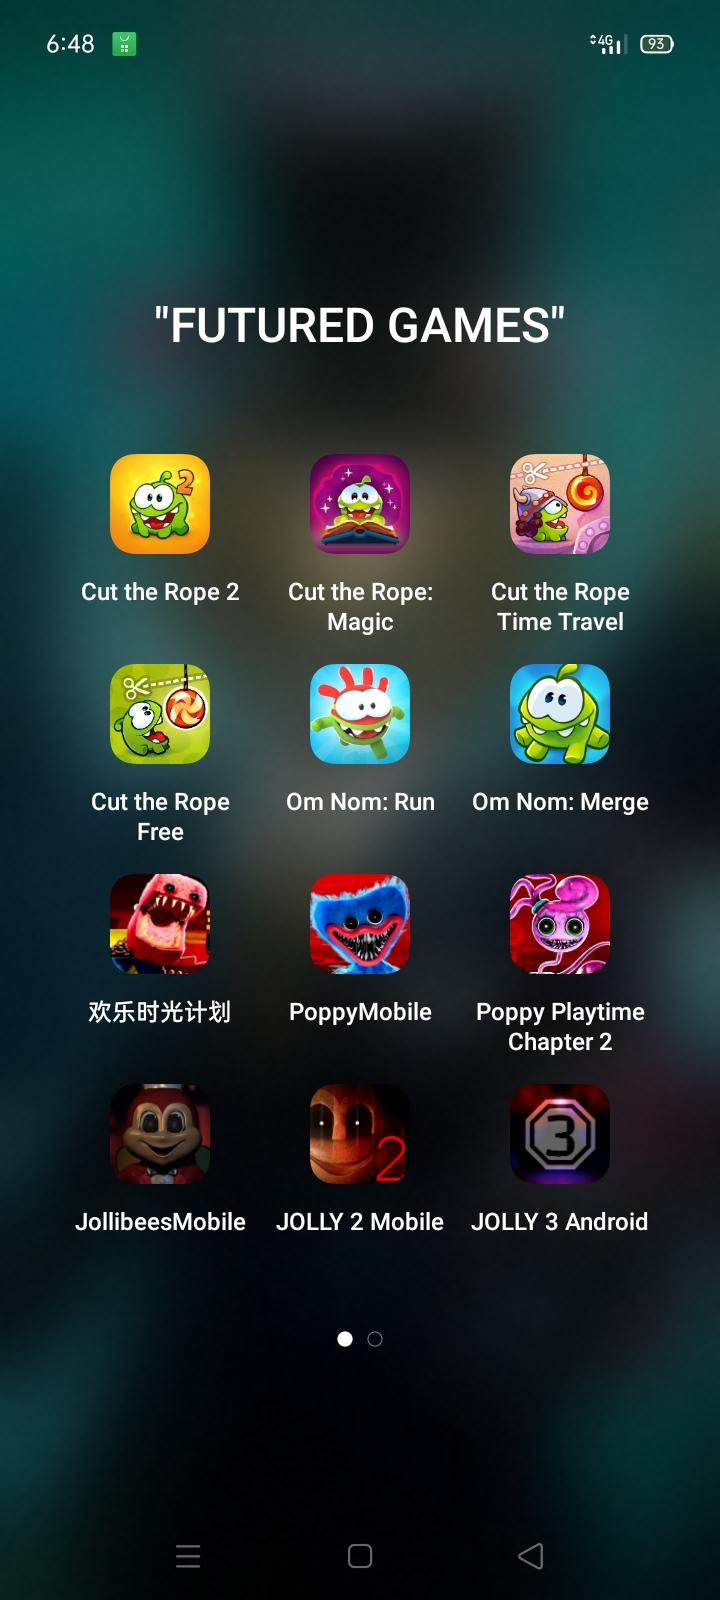 PROJECT: PLAYTIME android iOS-TapTap